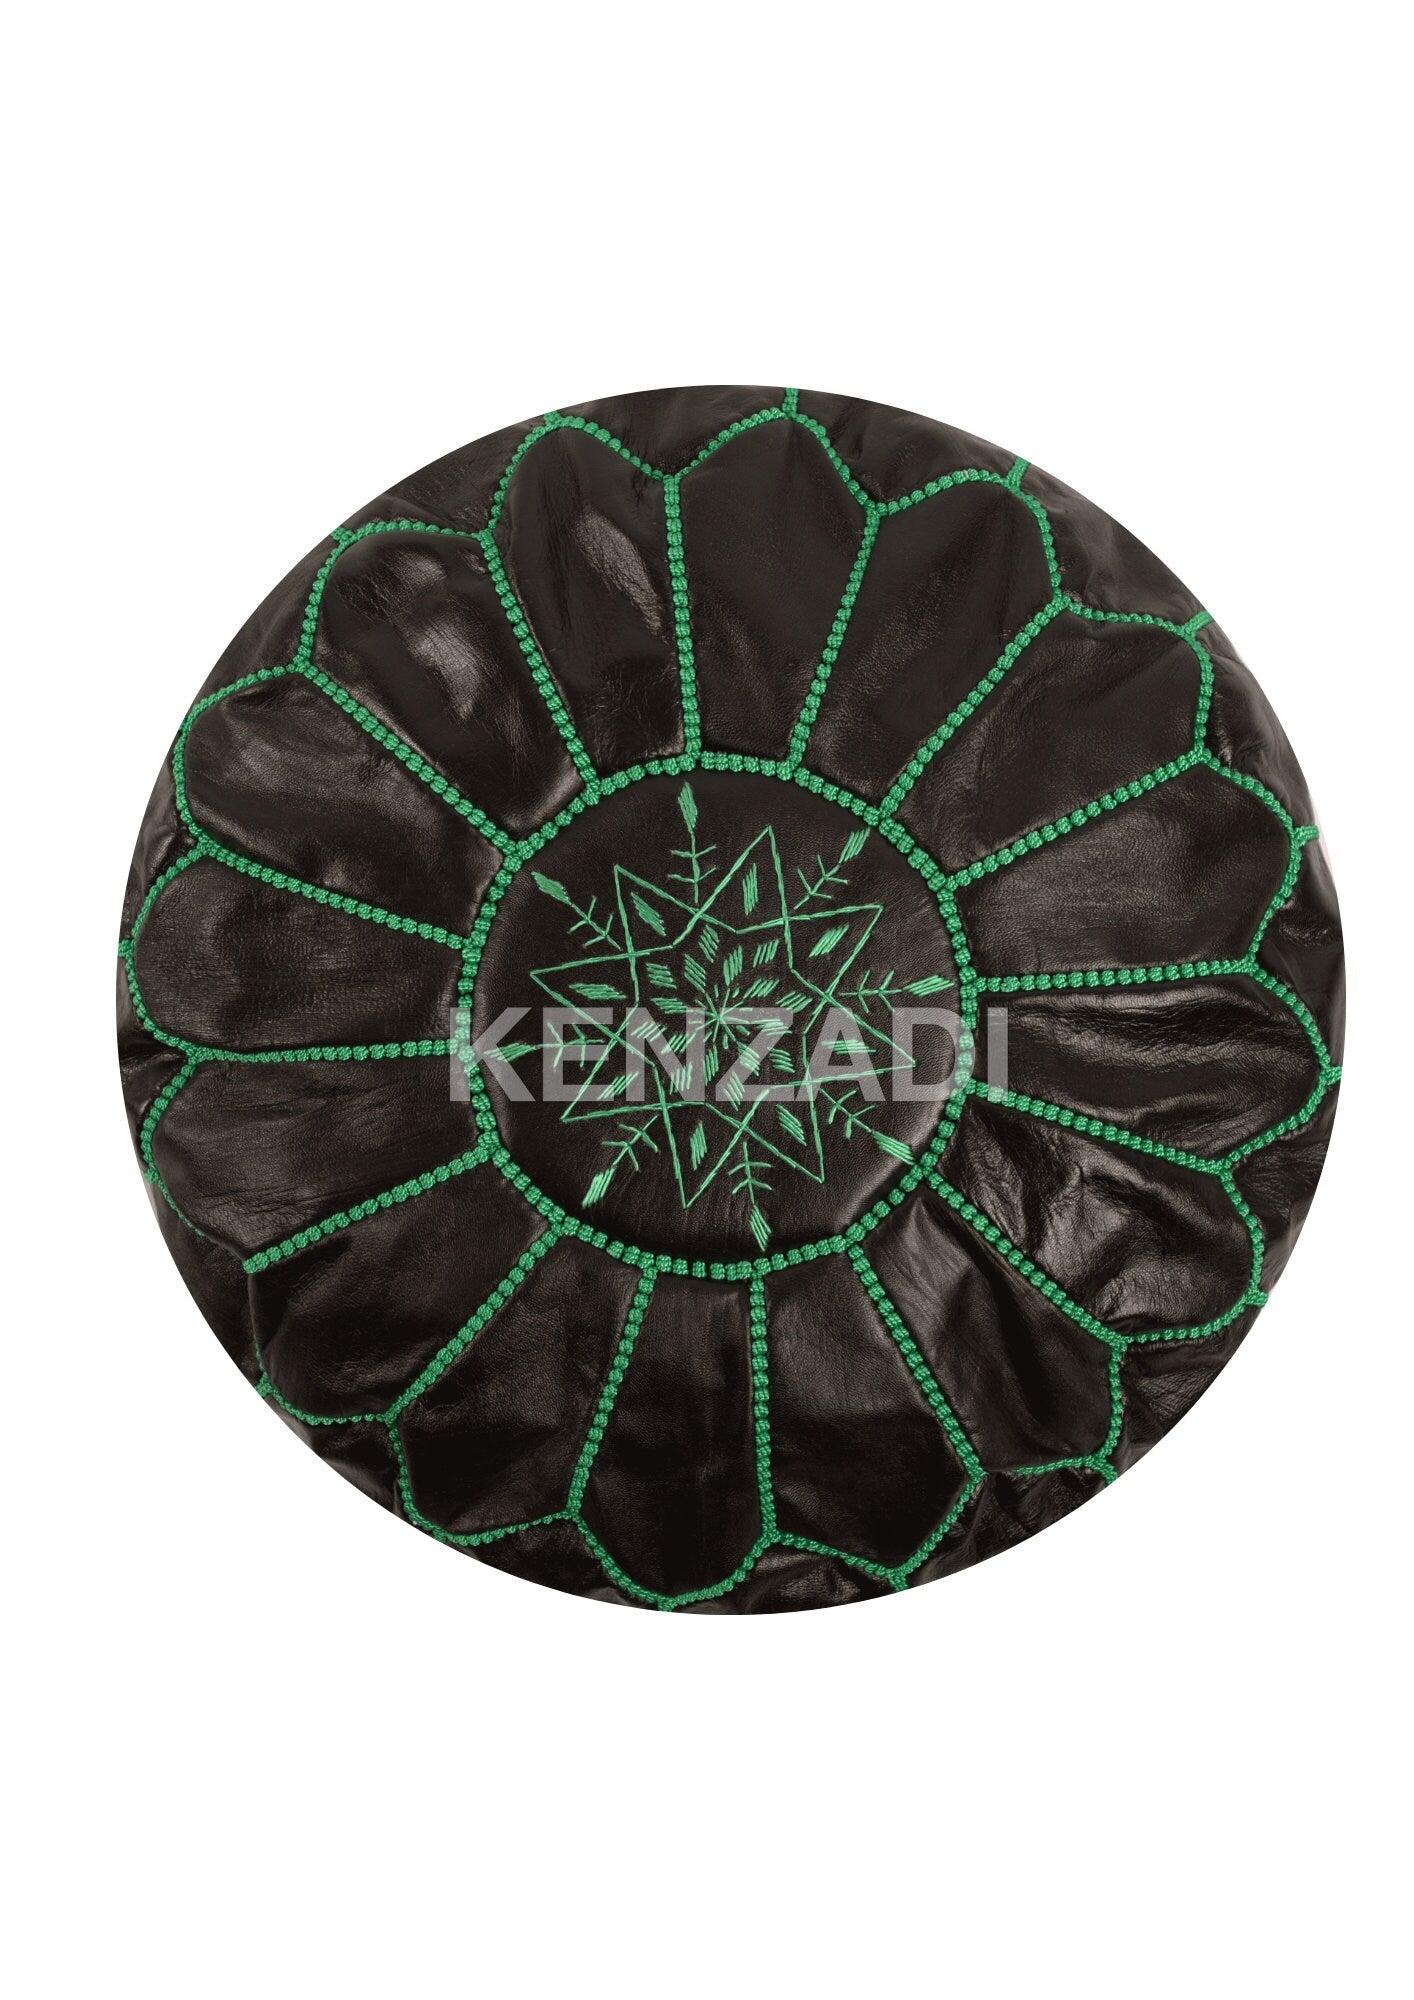 Handmade Moroccan leather pouf in sewn TAN leather with Black and Green embroidery. Perfect for adding a bohemian touch to your decor.